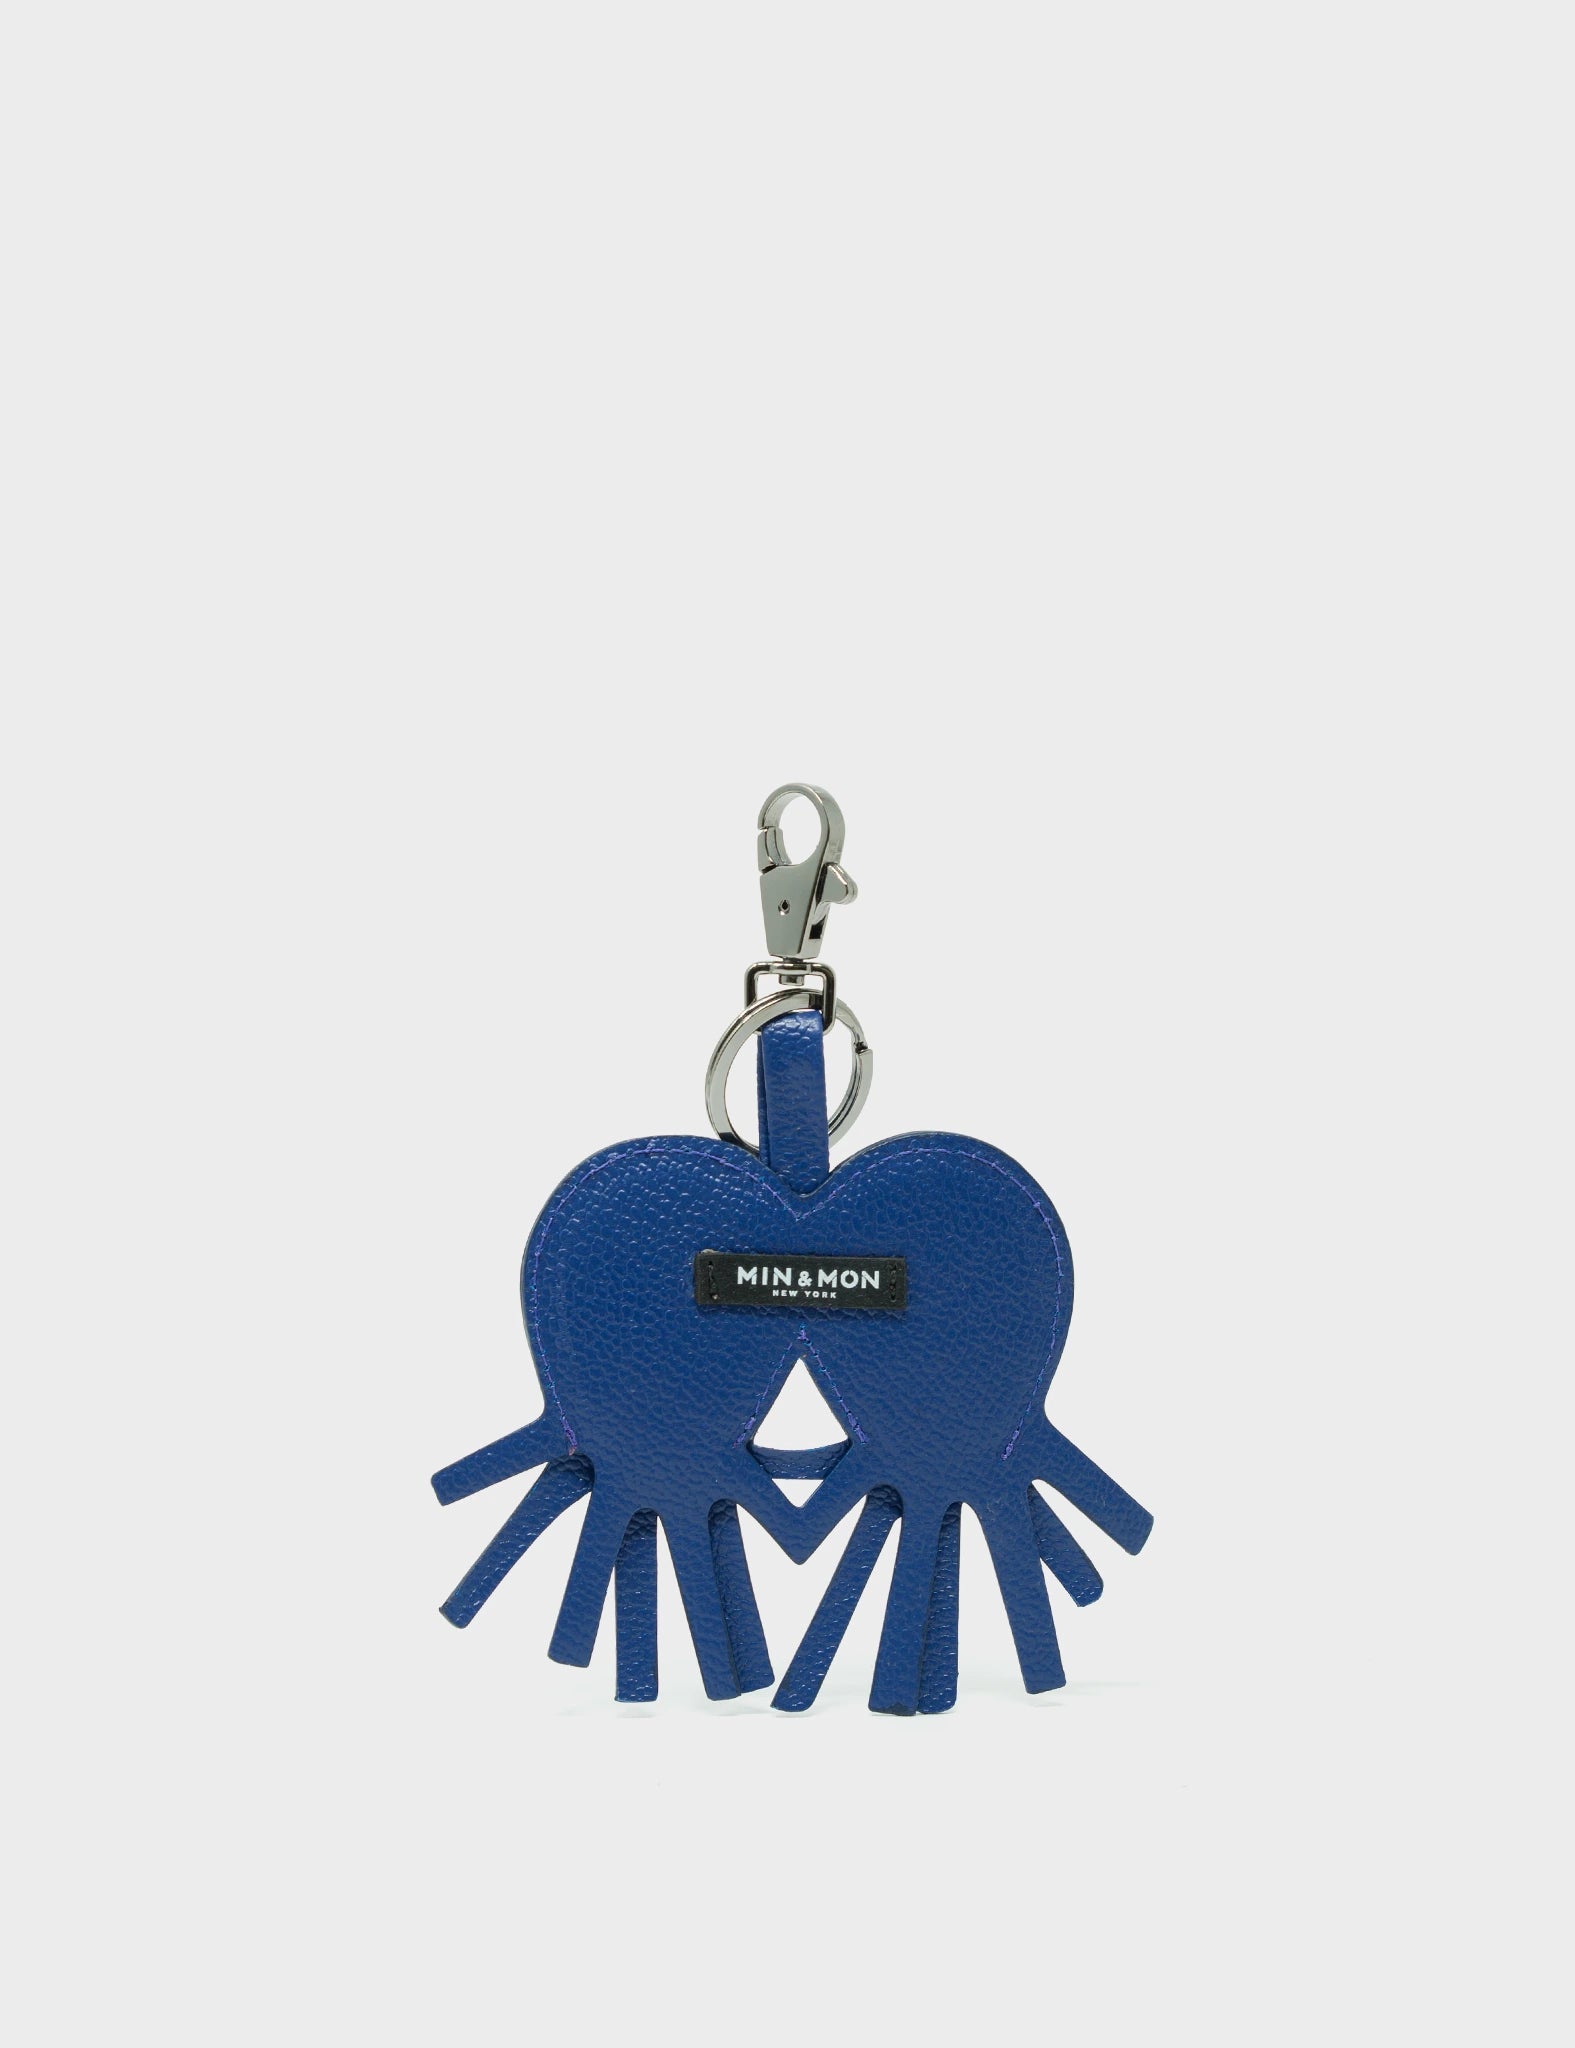 Octopus Twins Charm - Royal Blue Leather Keychain - Back 